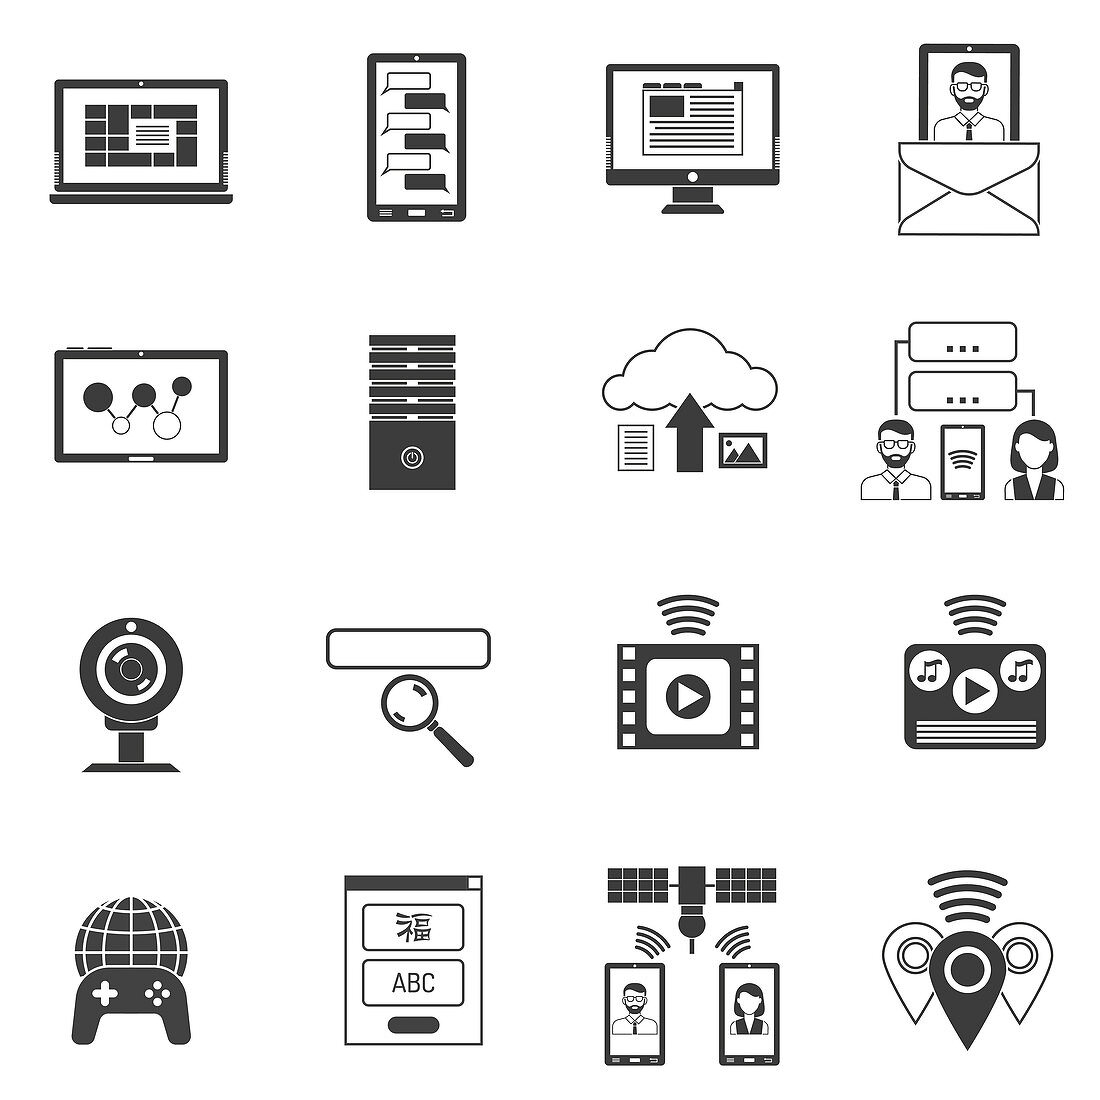 Technical support icons, illustration